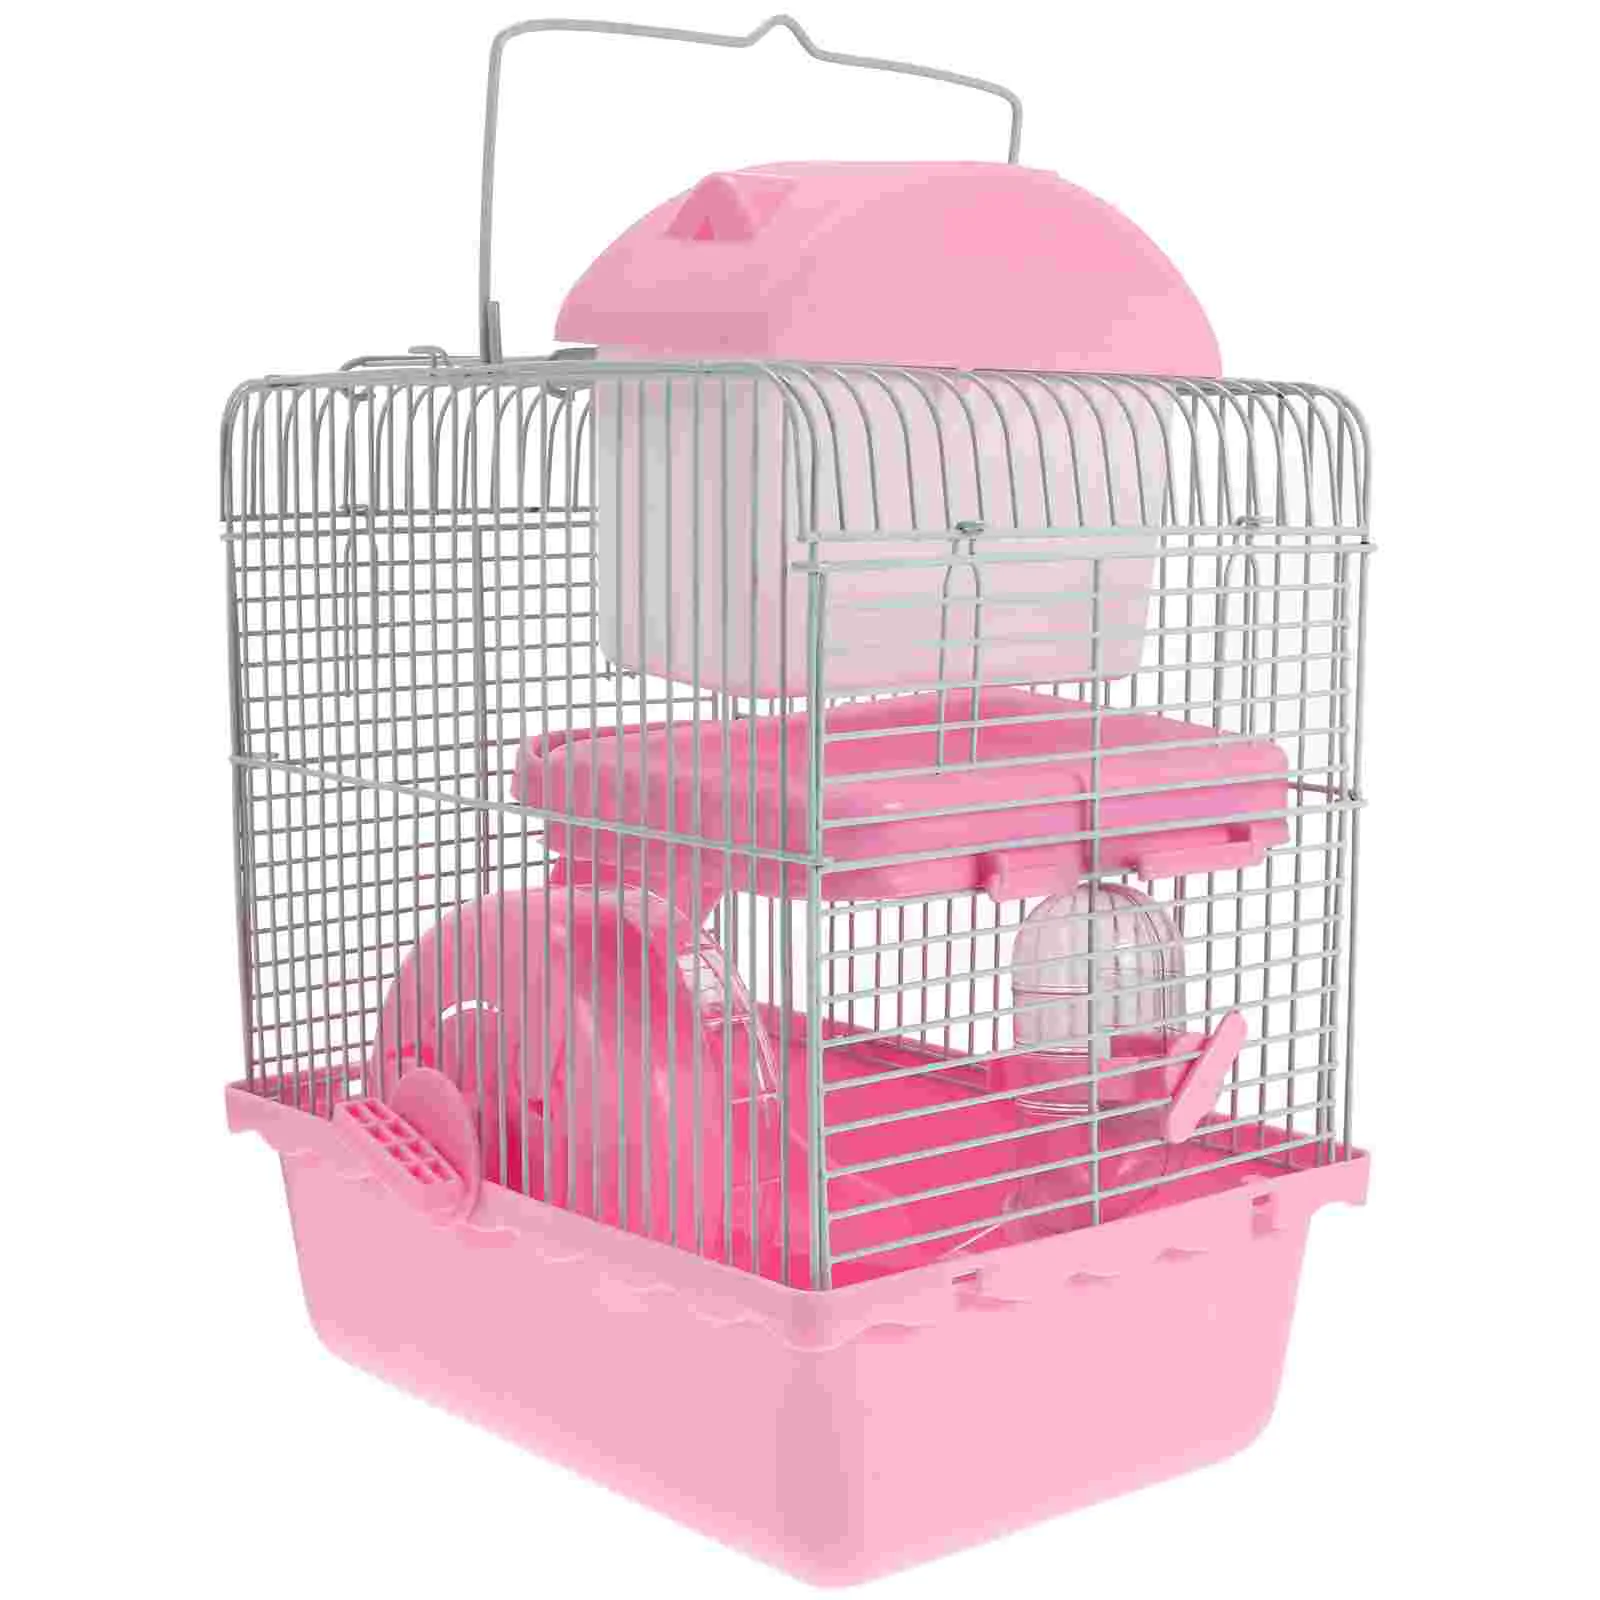 Hamster-Cage-Small-Animal-House-Hedgehog-Hut-Pet-Activity-Mouse-Toy-Exercise-Accessories.jpg